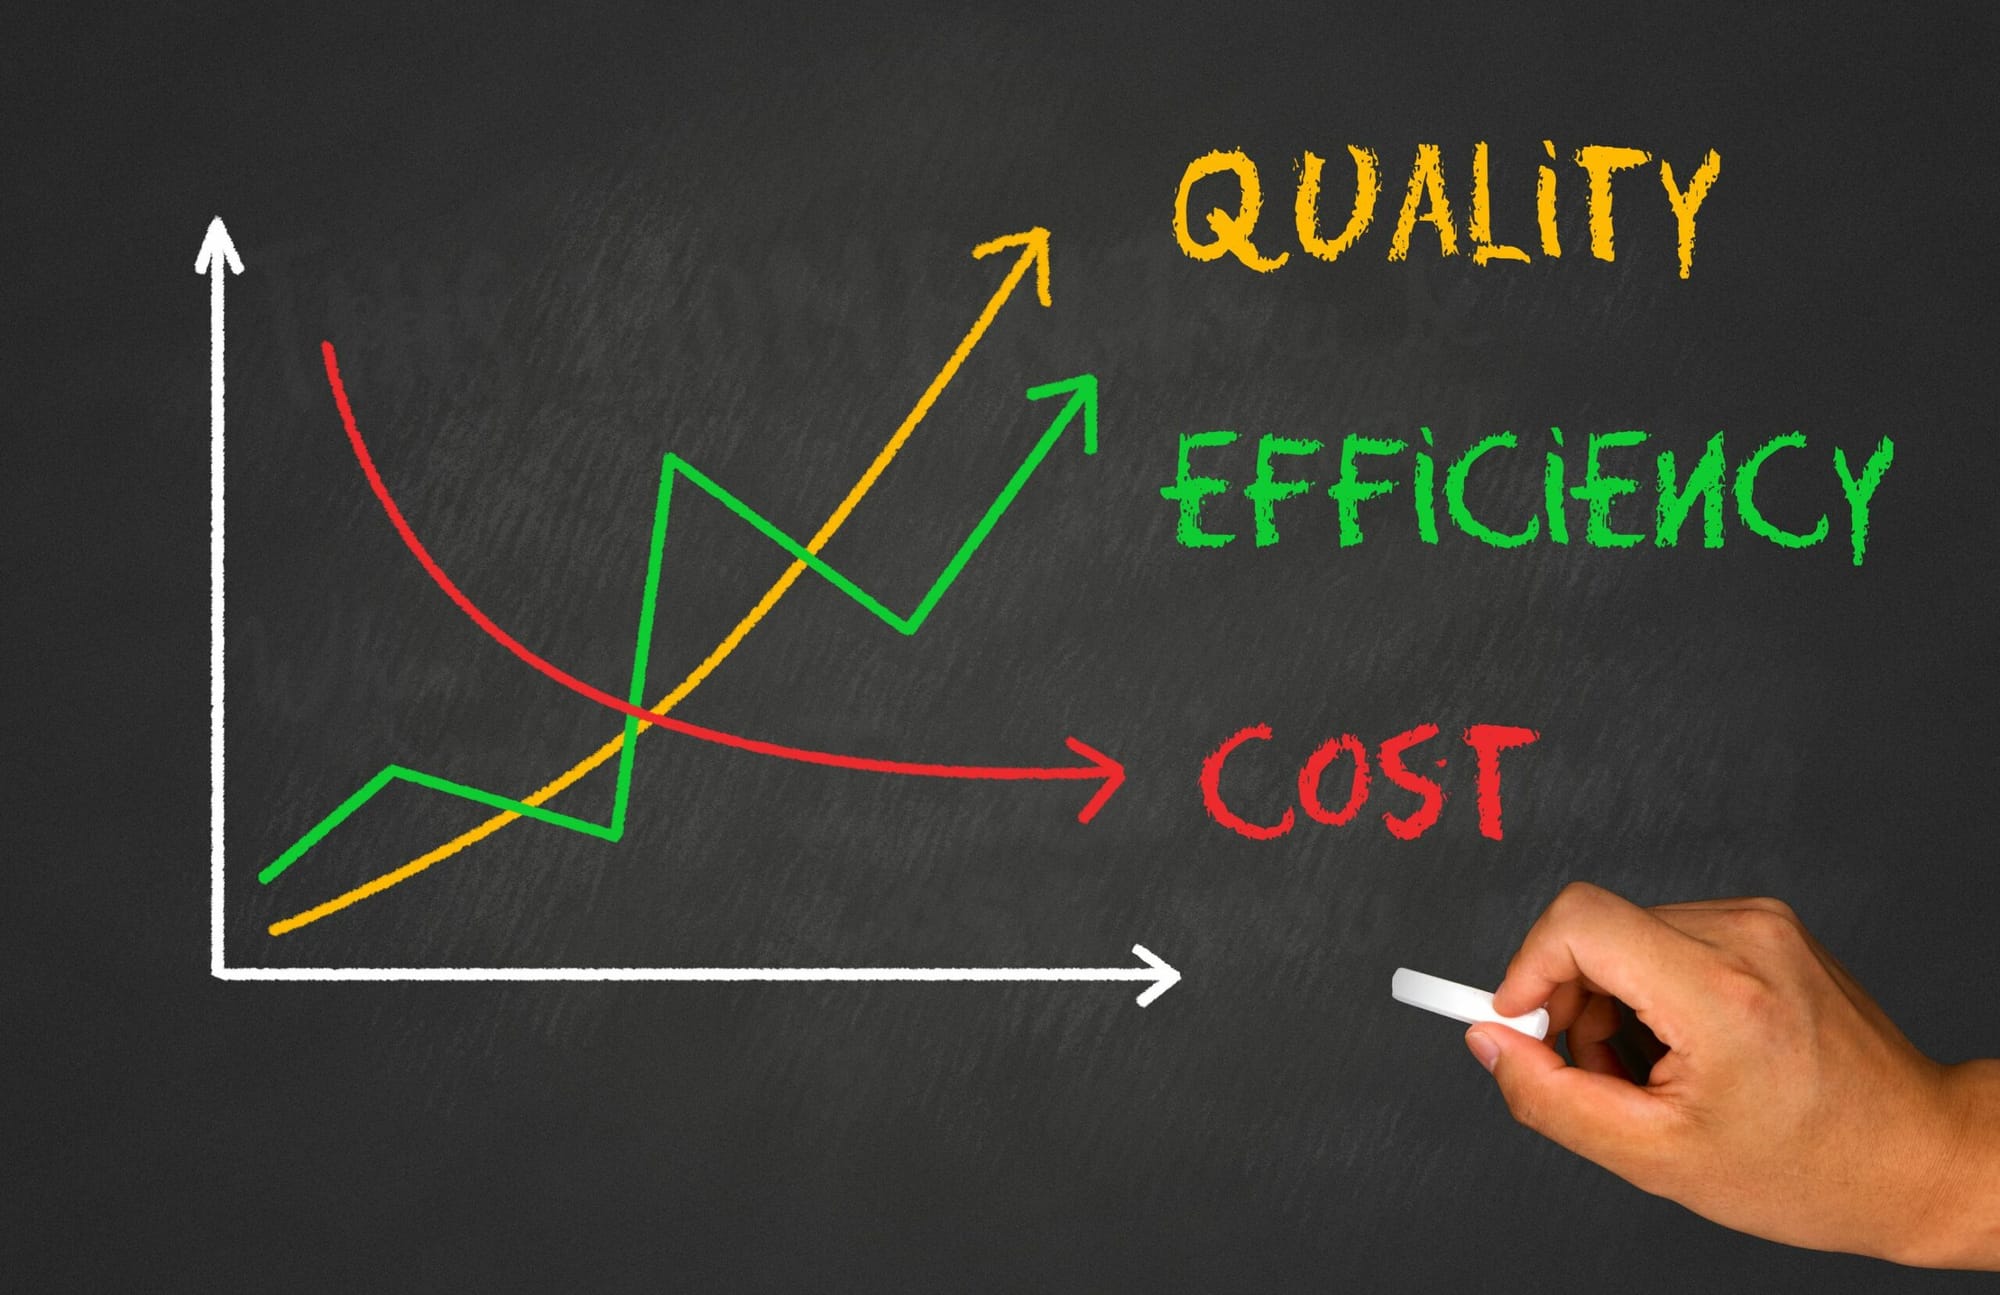 Value engineering diagram: Quality, Efficiency and Cost